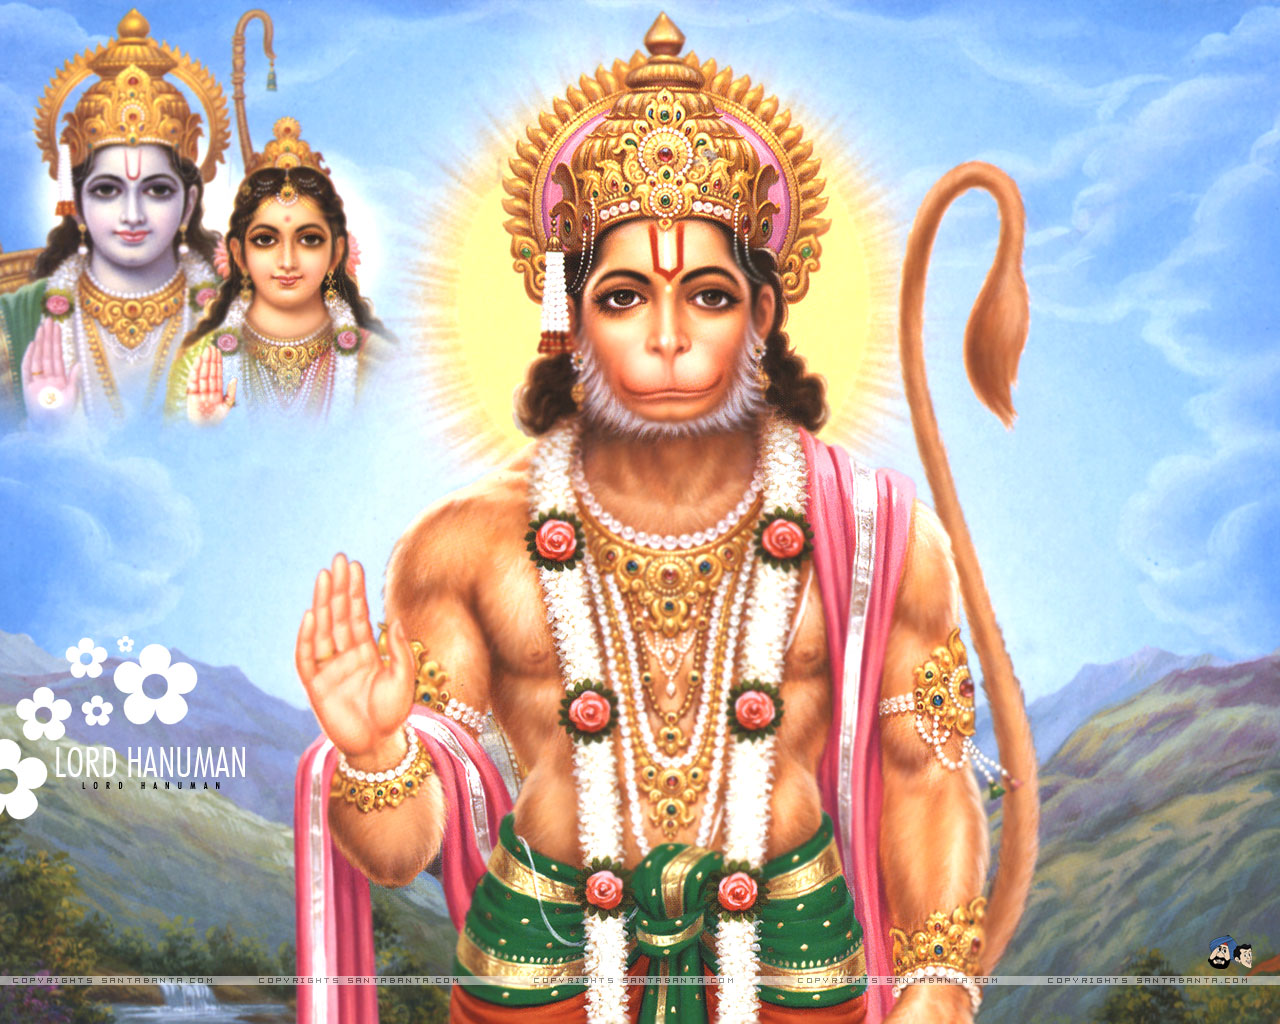 God Wallpaper Wallpapers For Free Download About Wallpapers
hindu - Hindu Lord Hanuman - HD Wallpaper 